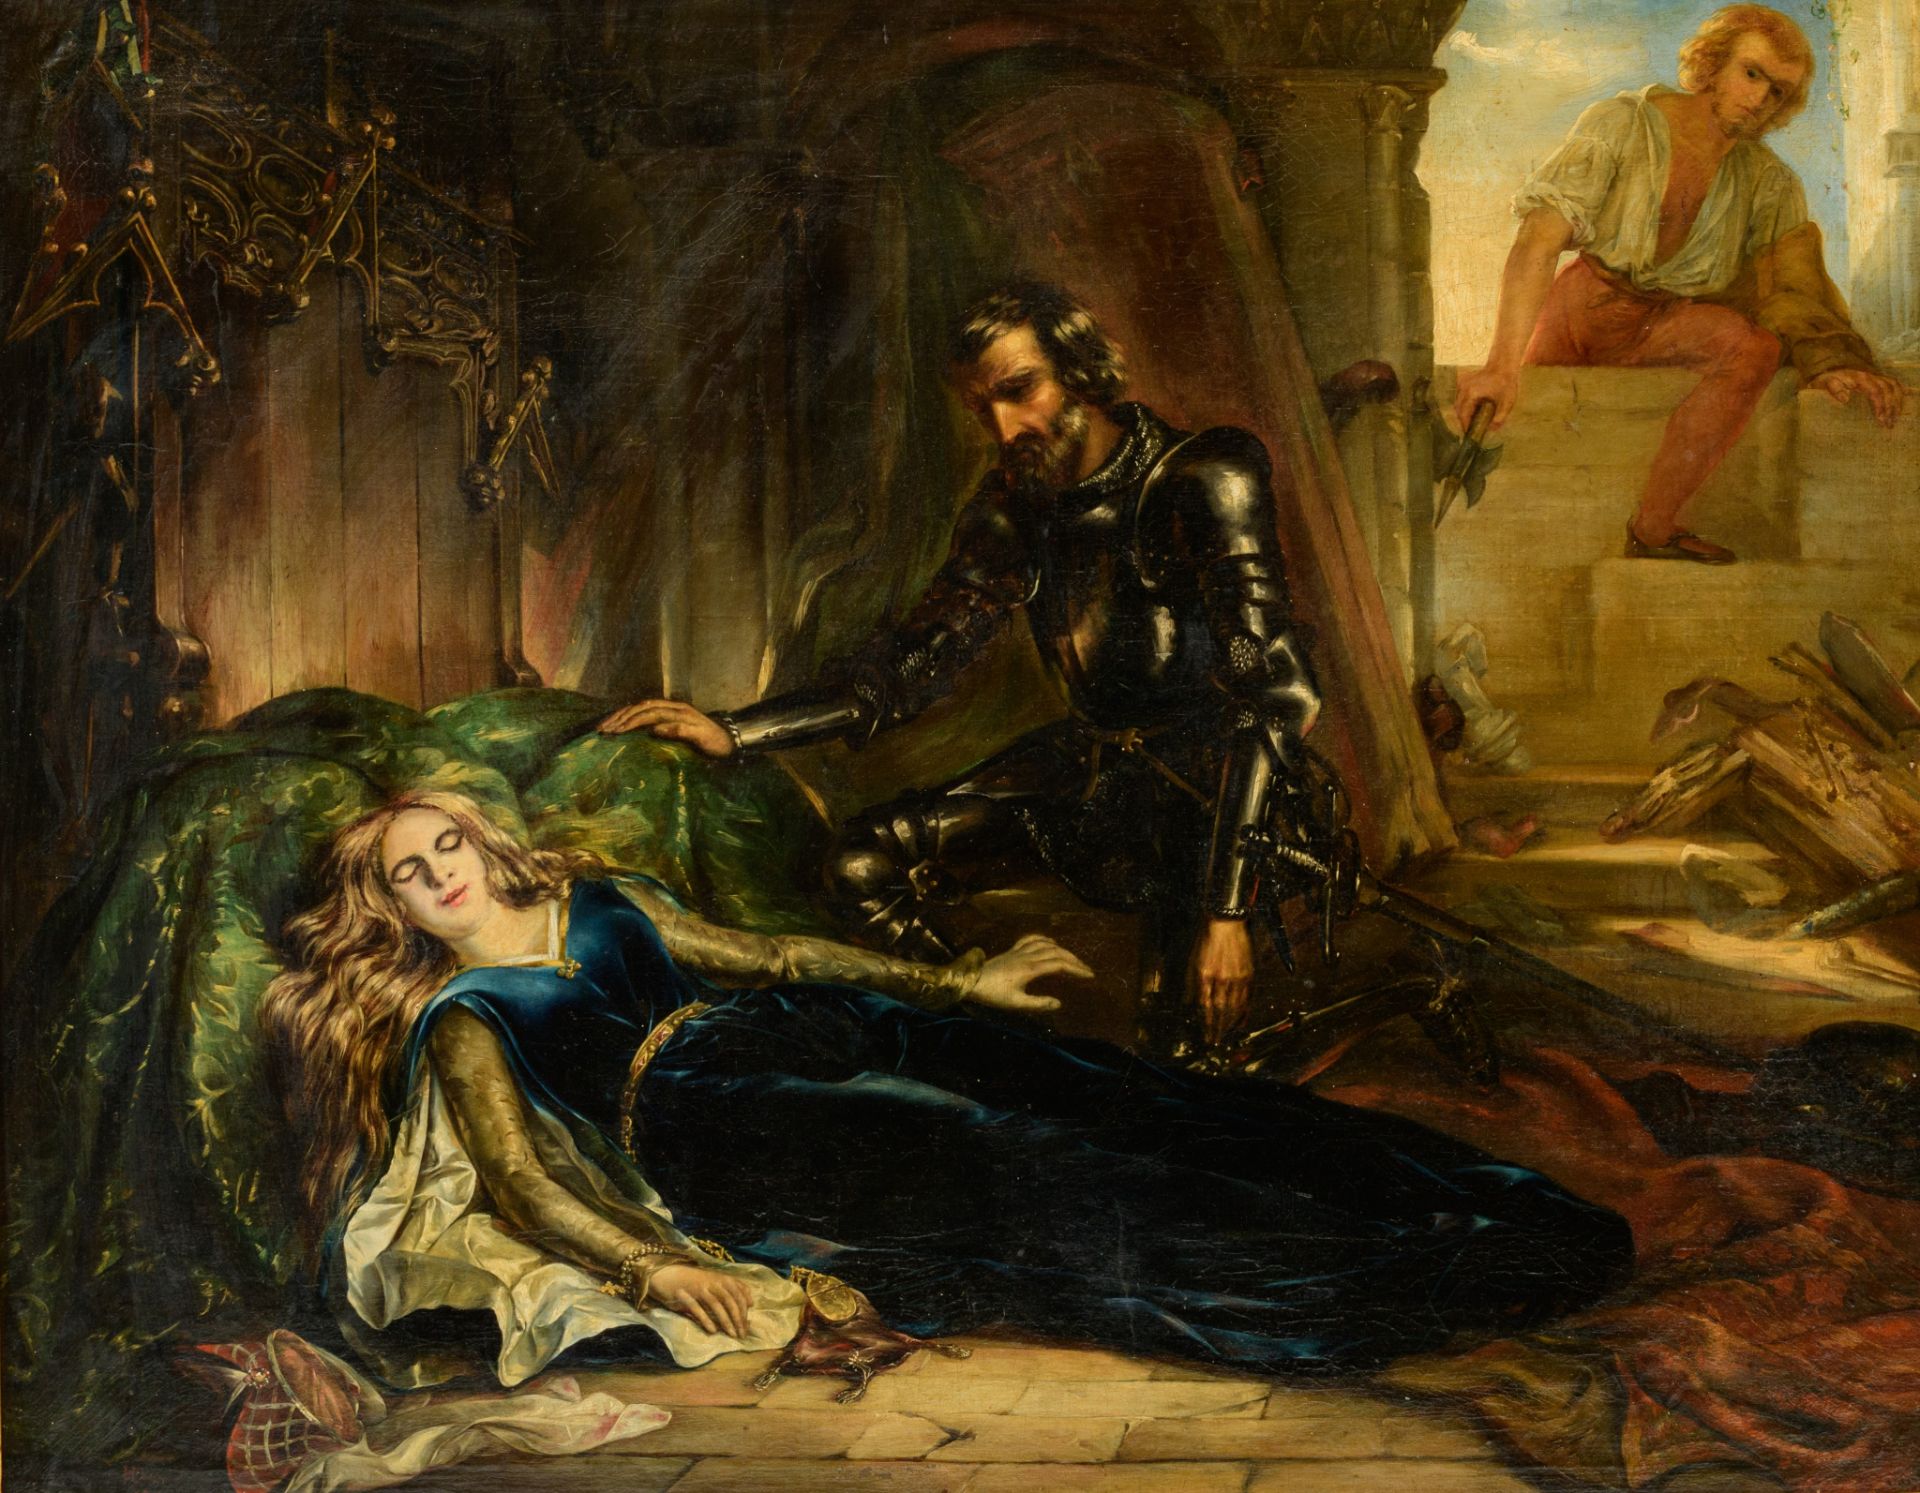 Dobbelaere H., a Gothic Revival scene of a knight rescuing a damsel, 1844, 163 x 222 cm